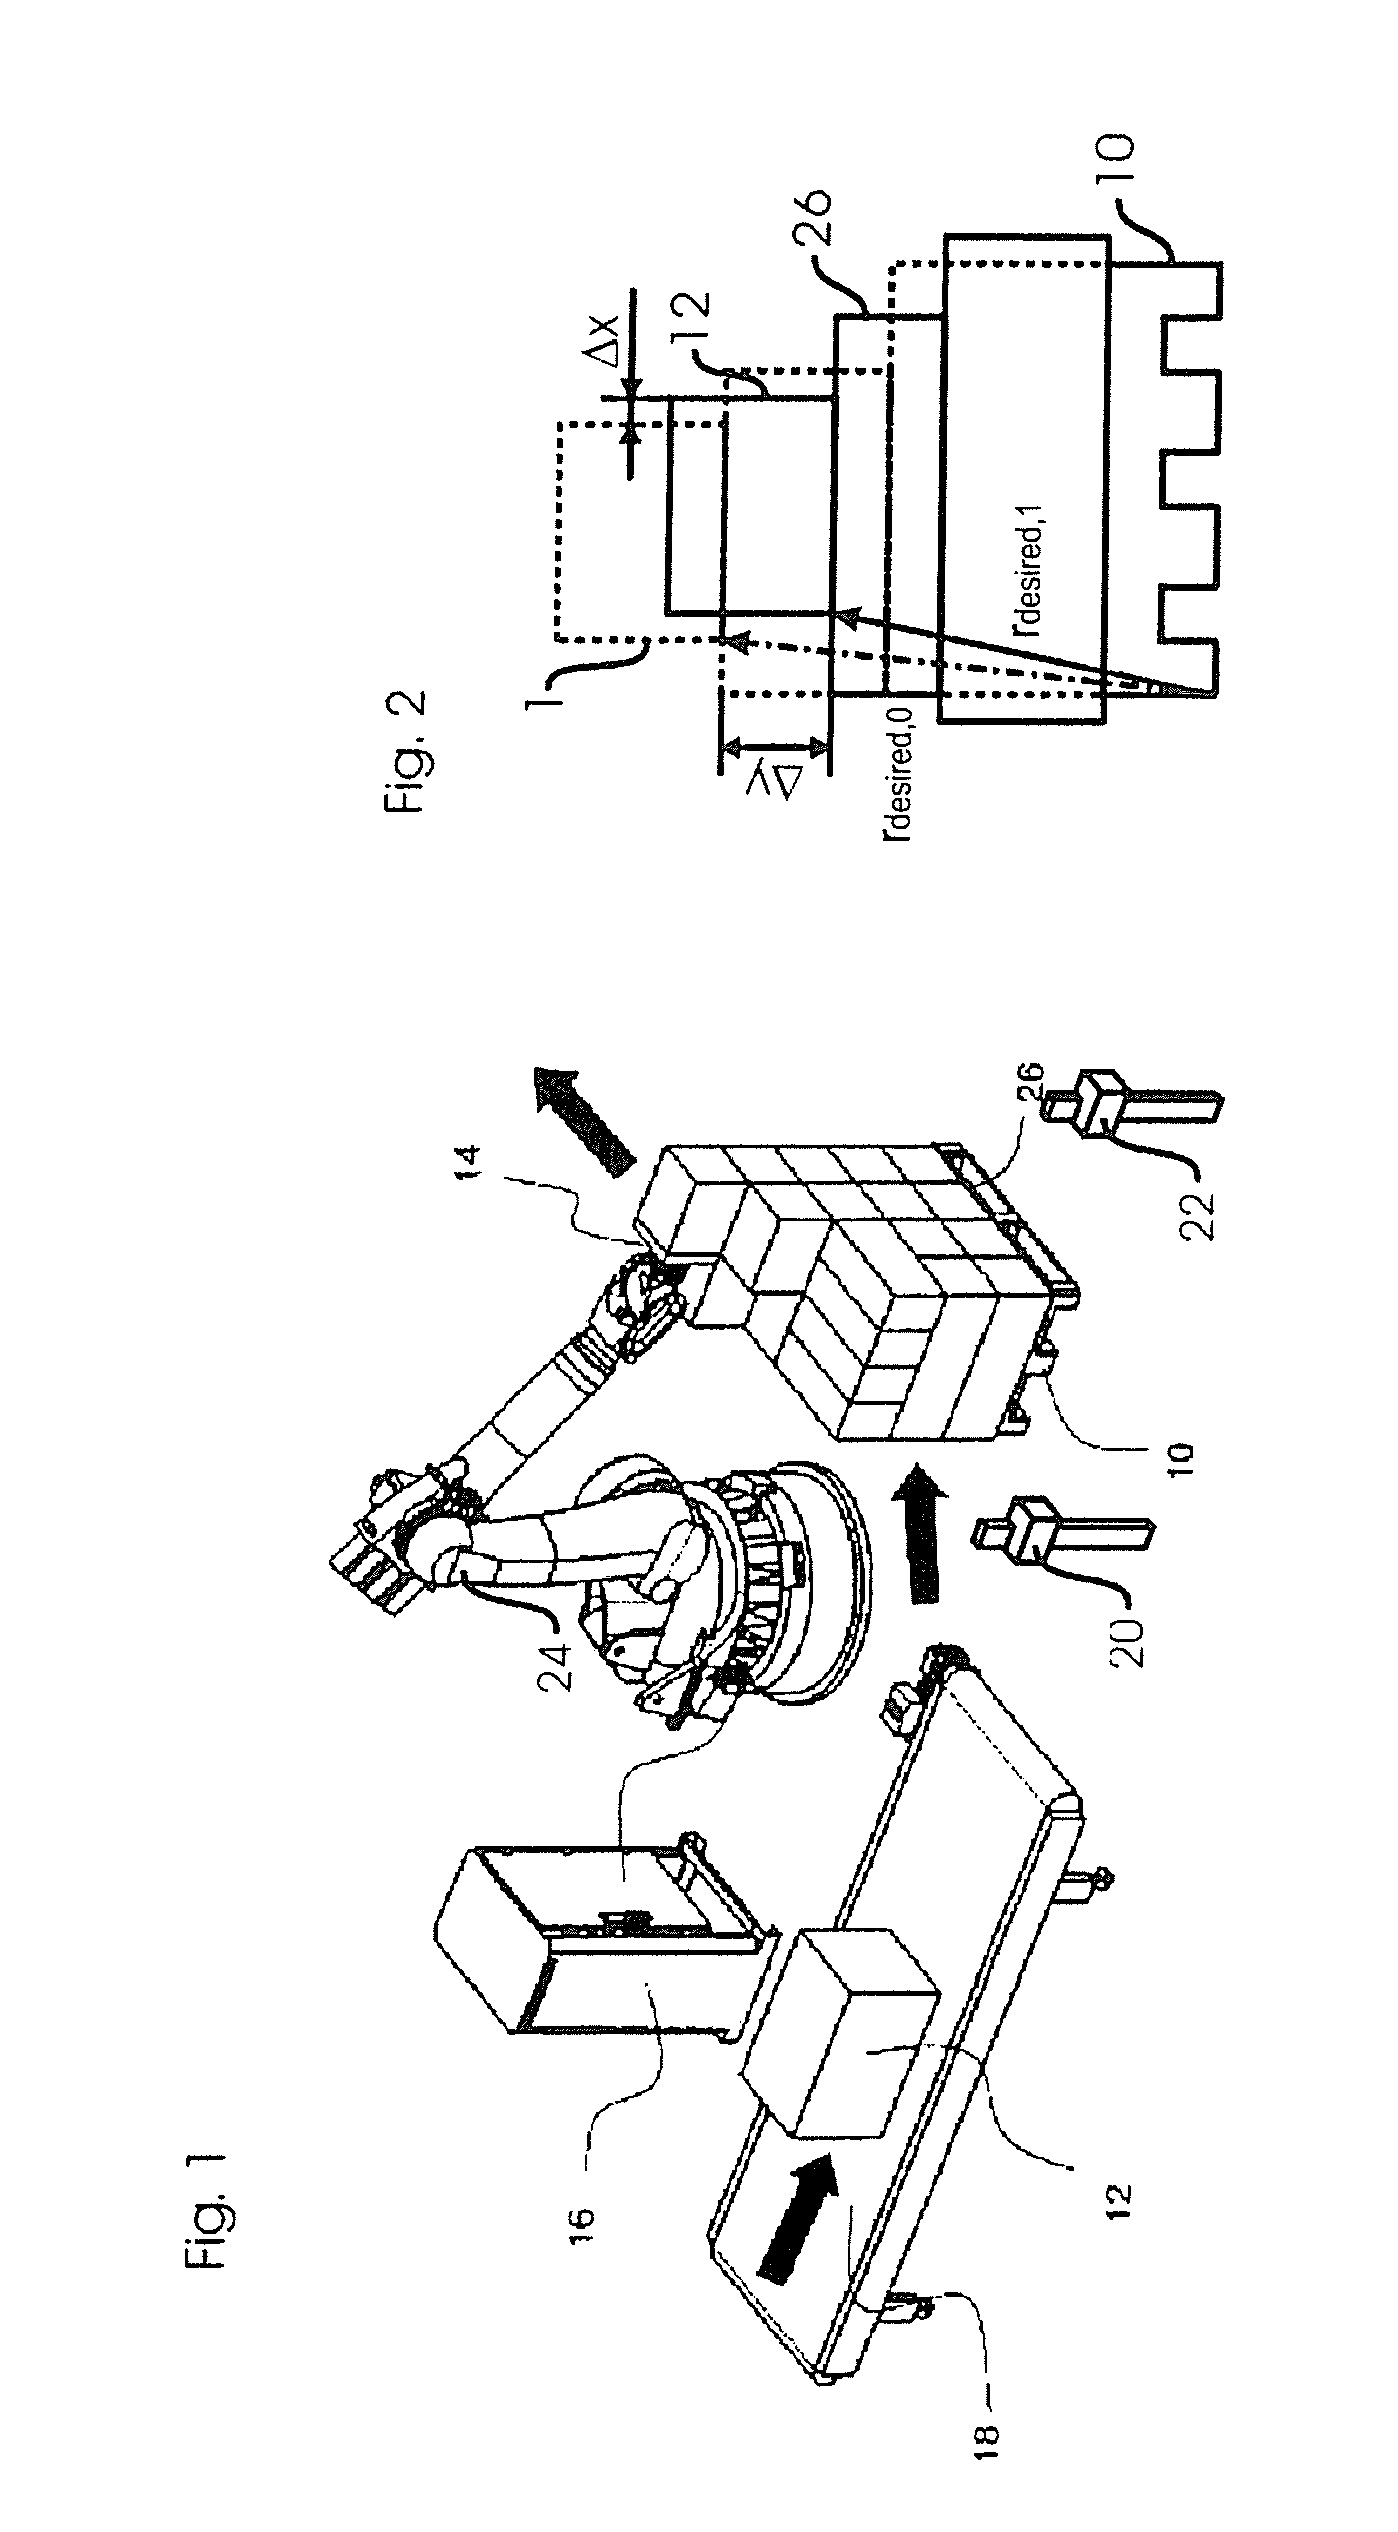 Method and device for automated loading of packages on a load carrier